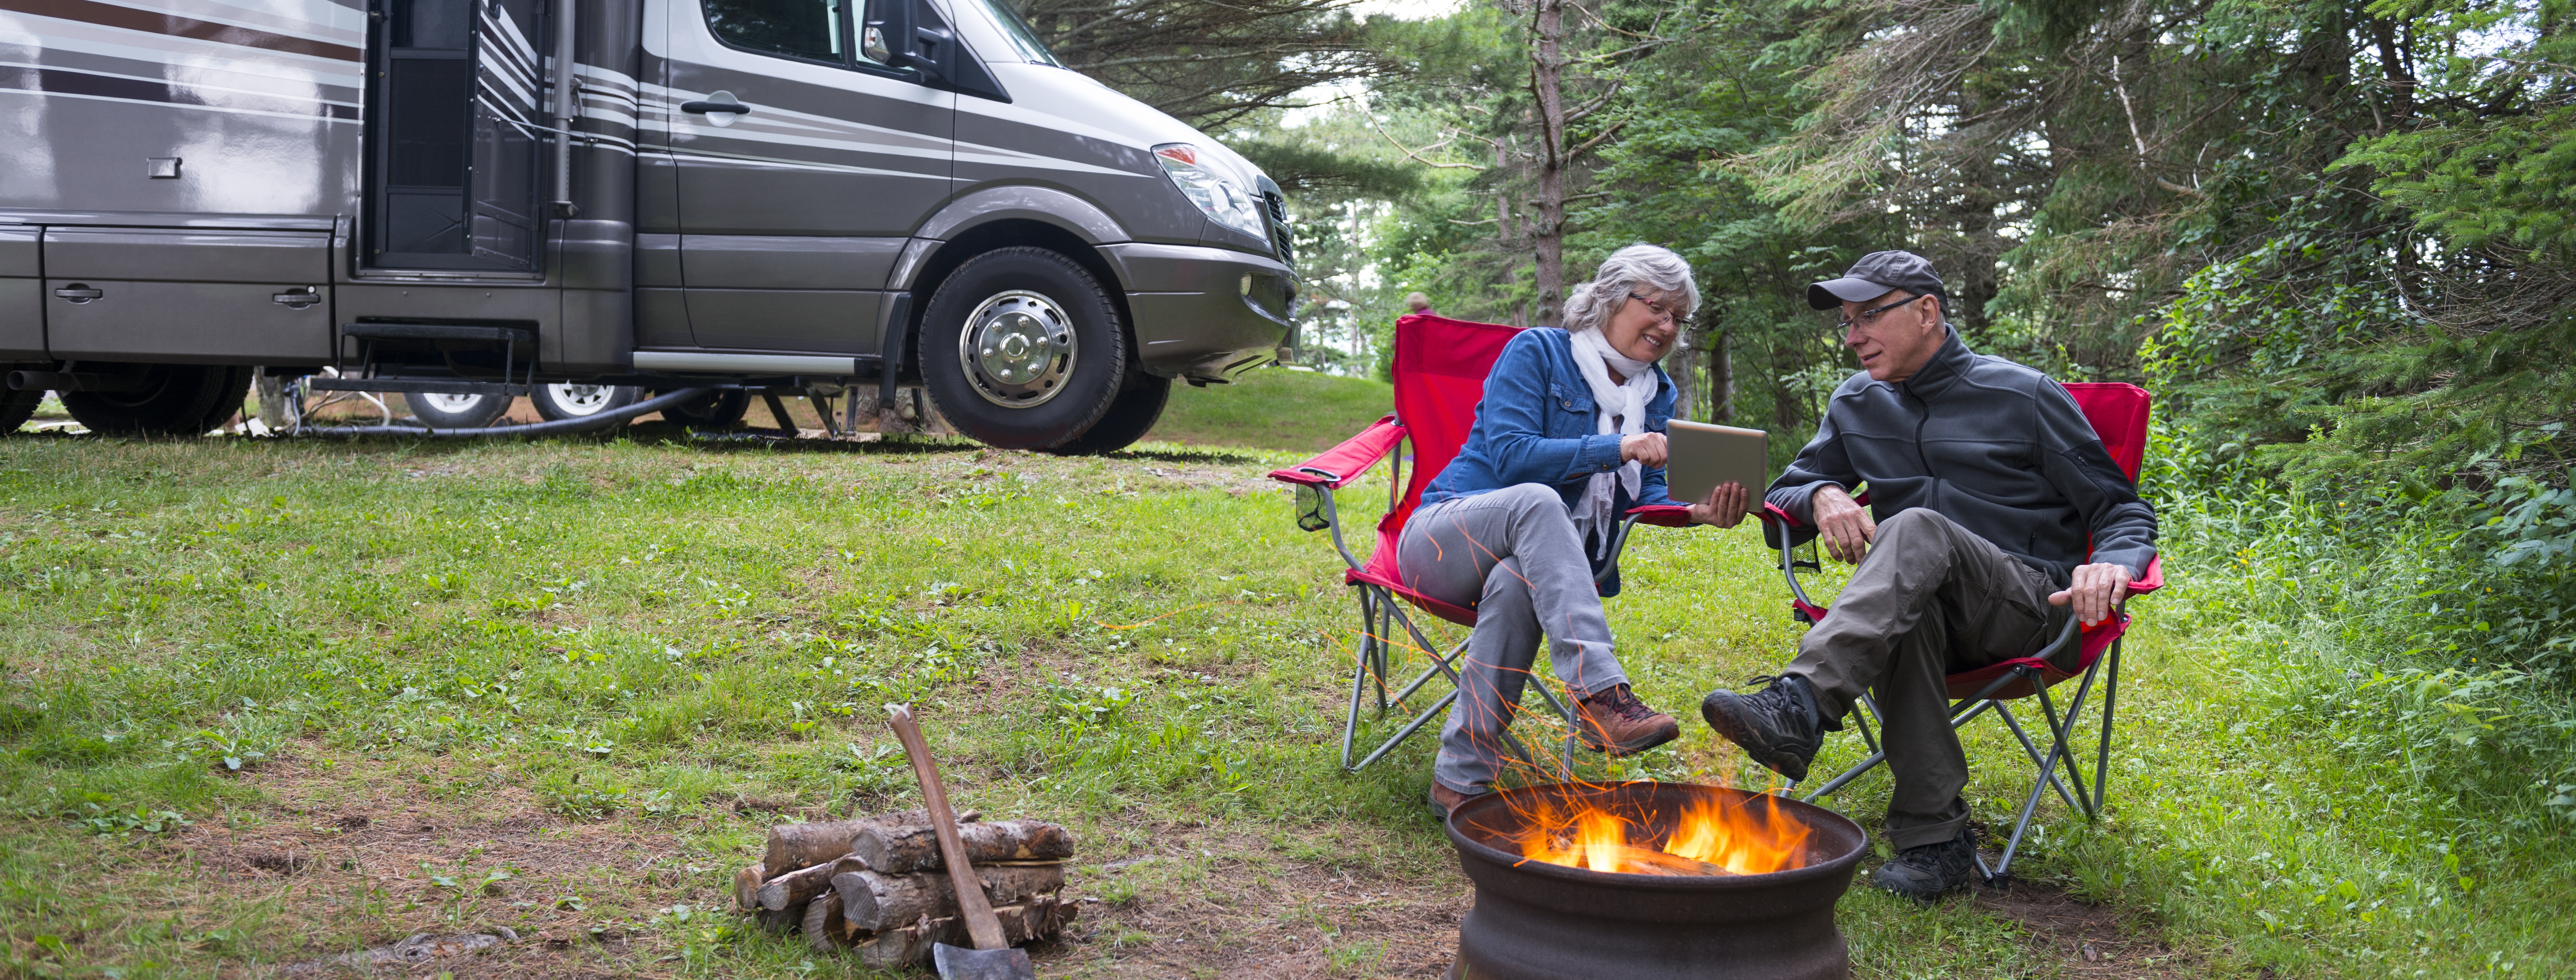 Couple enjoying a fire by their RV